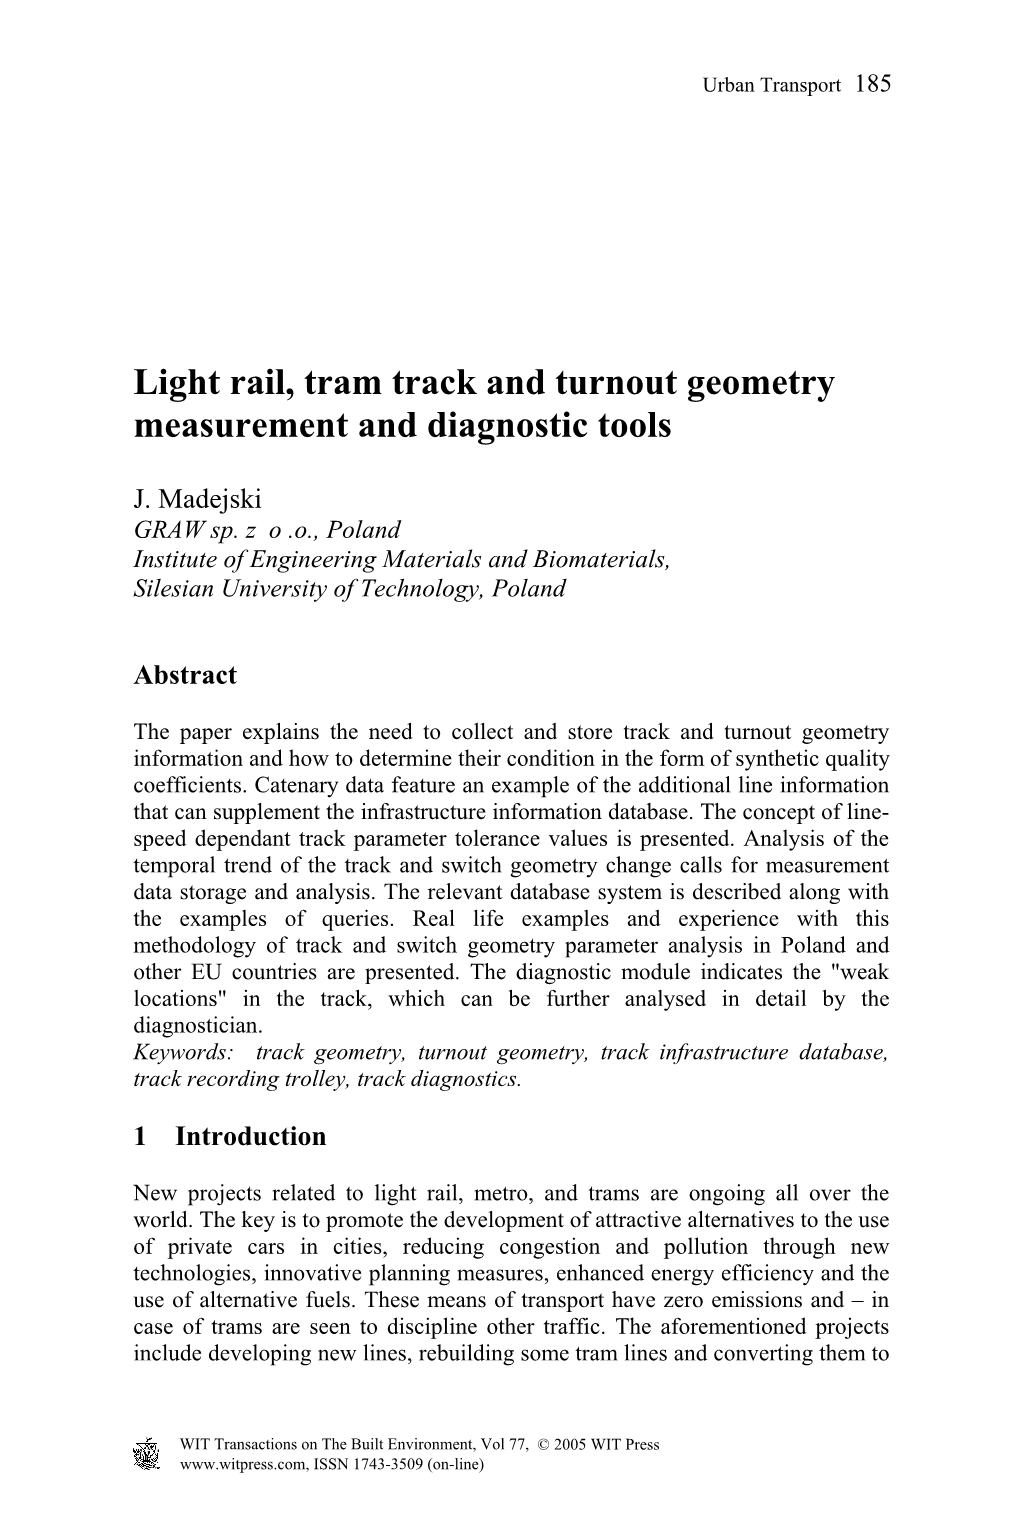 Light Rail, Tram Track and Turnout Geometry Measurement and Diagnostic Tools